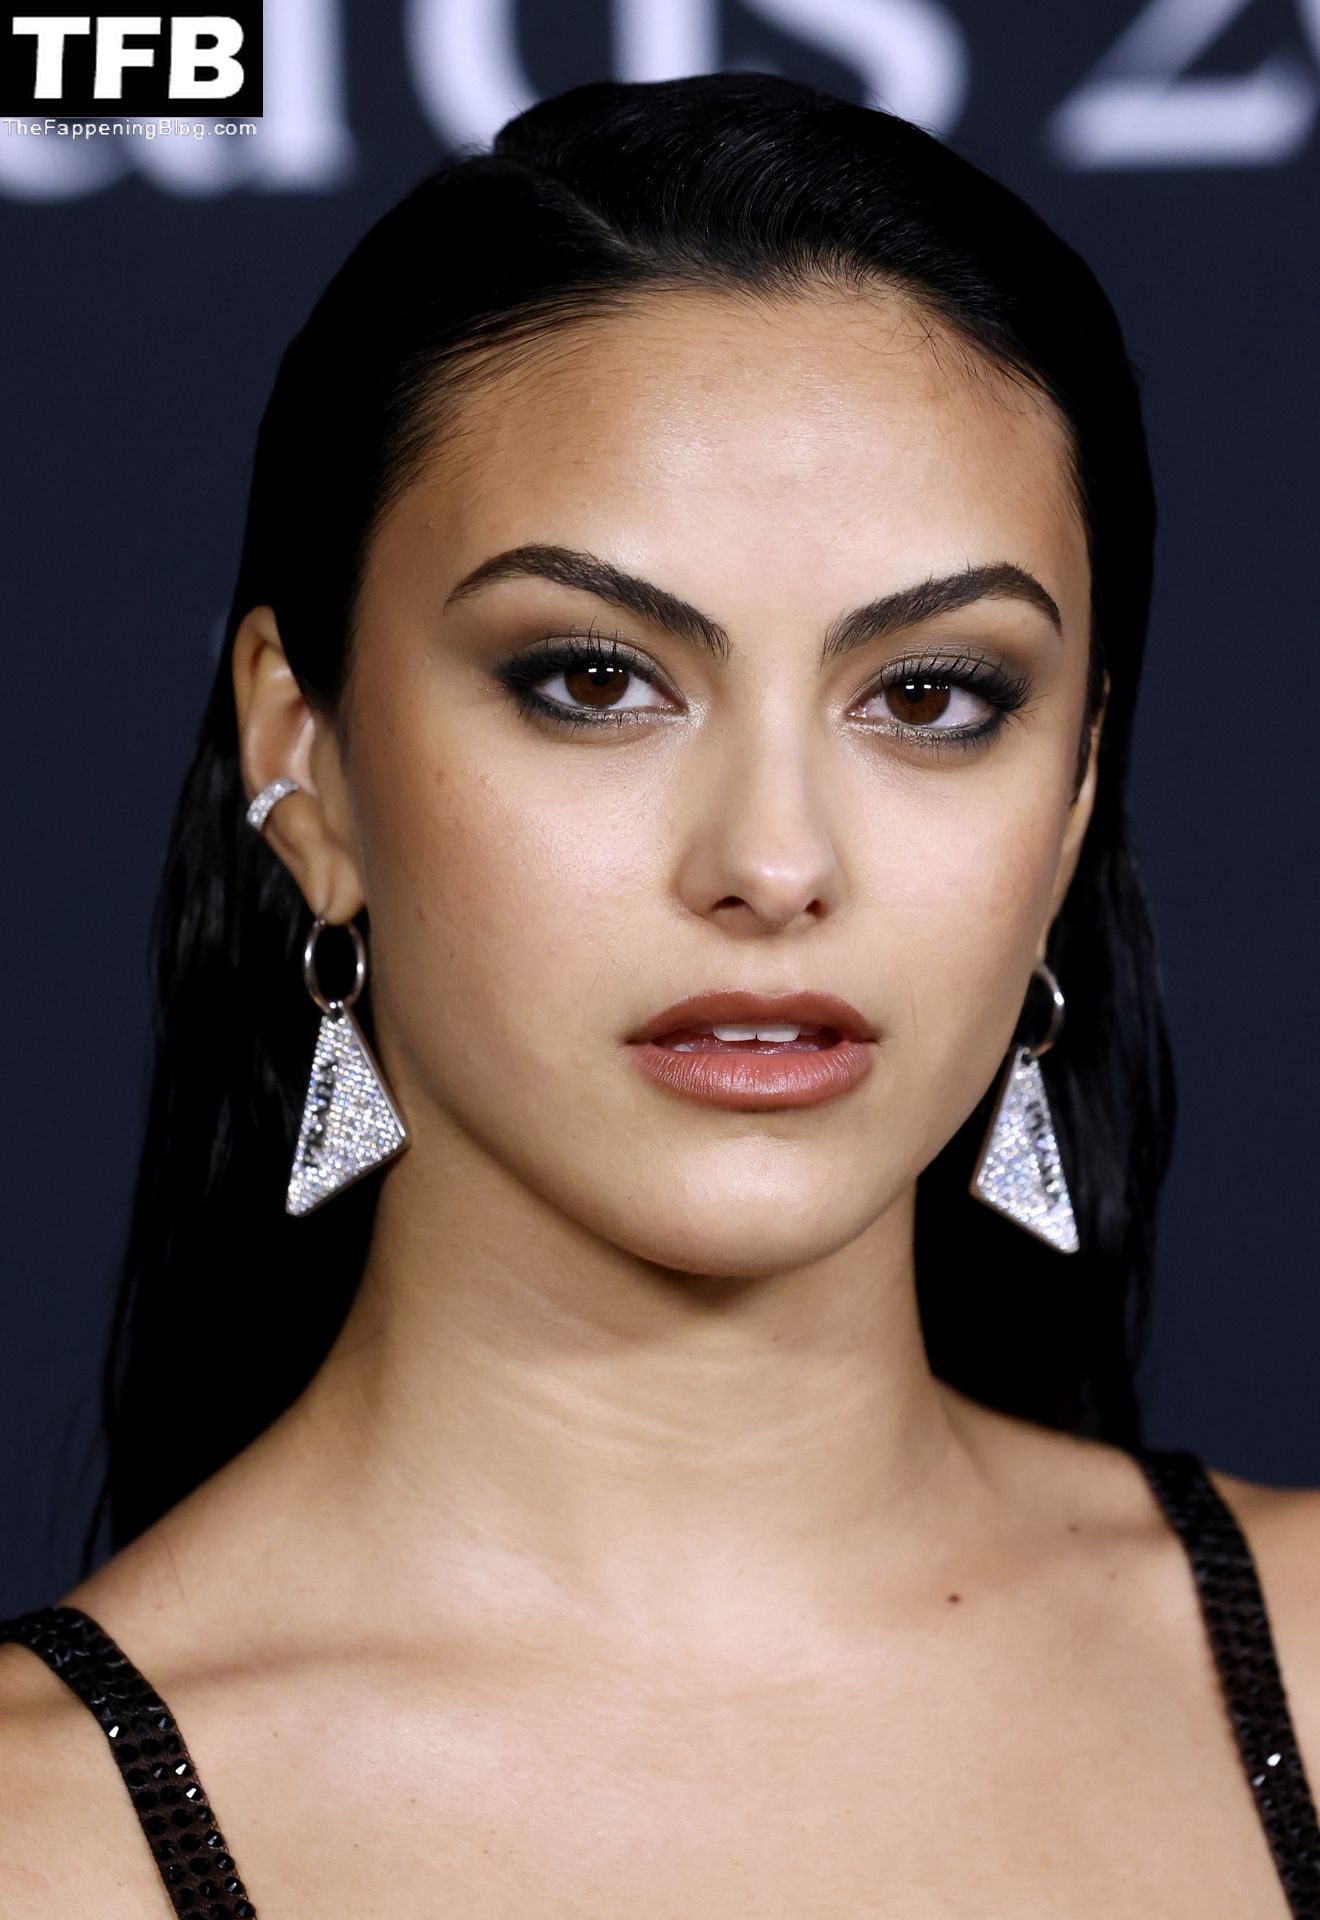 Camila-Mendes-See-Through-Tits-The-Fappening-Blog-30.jpg